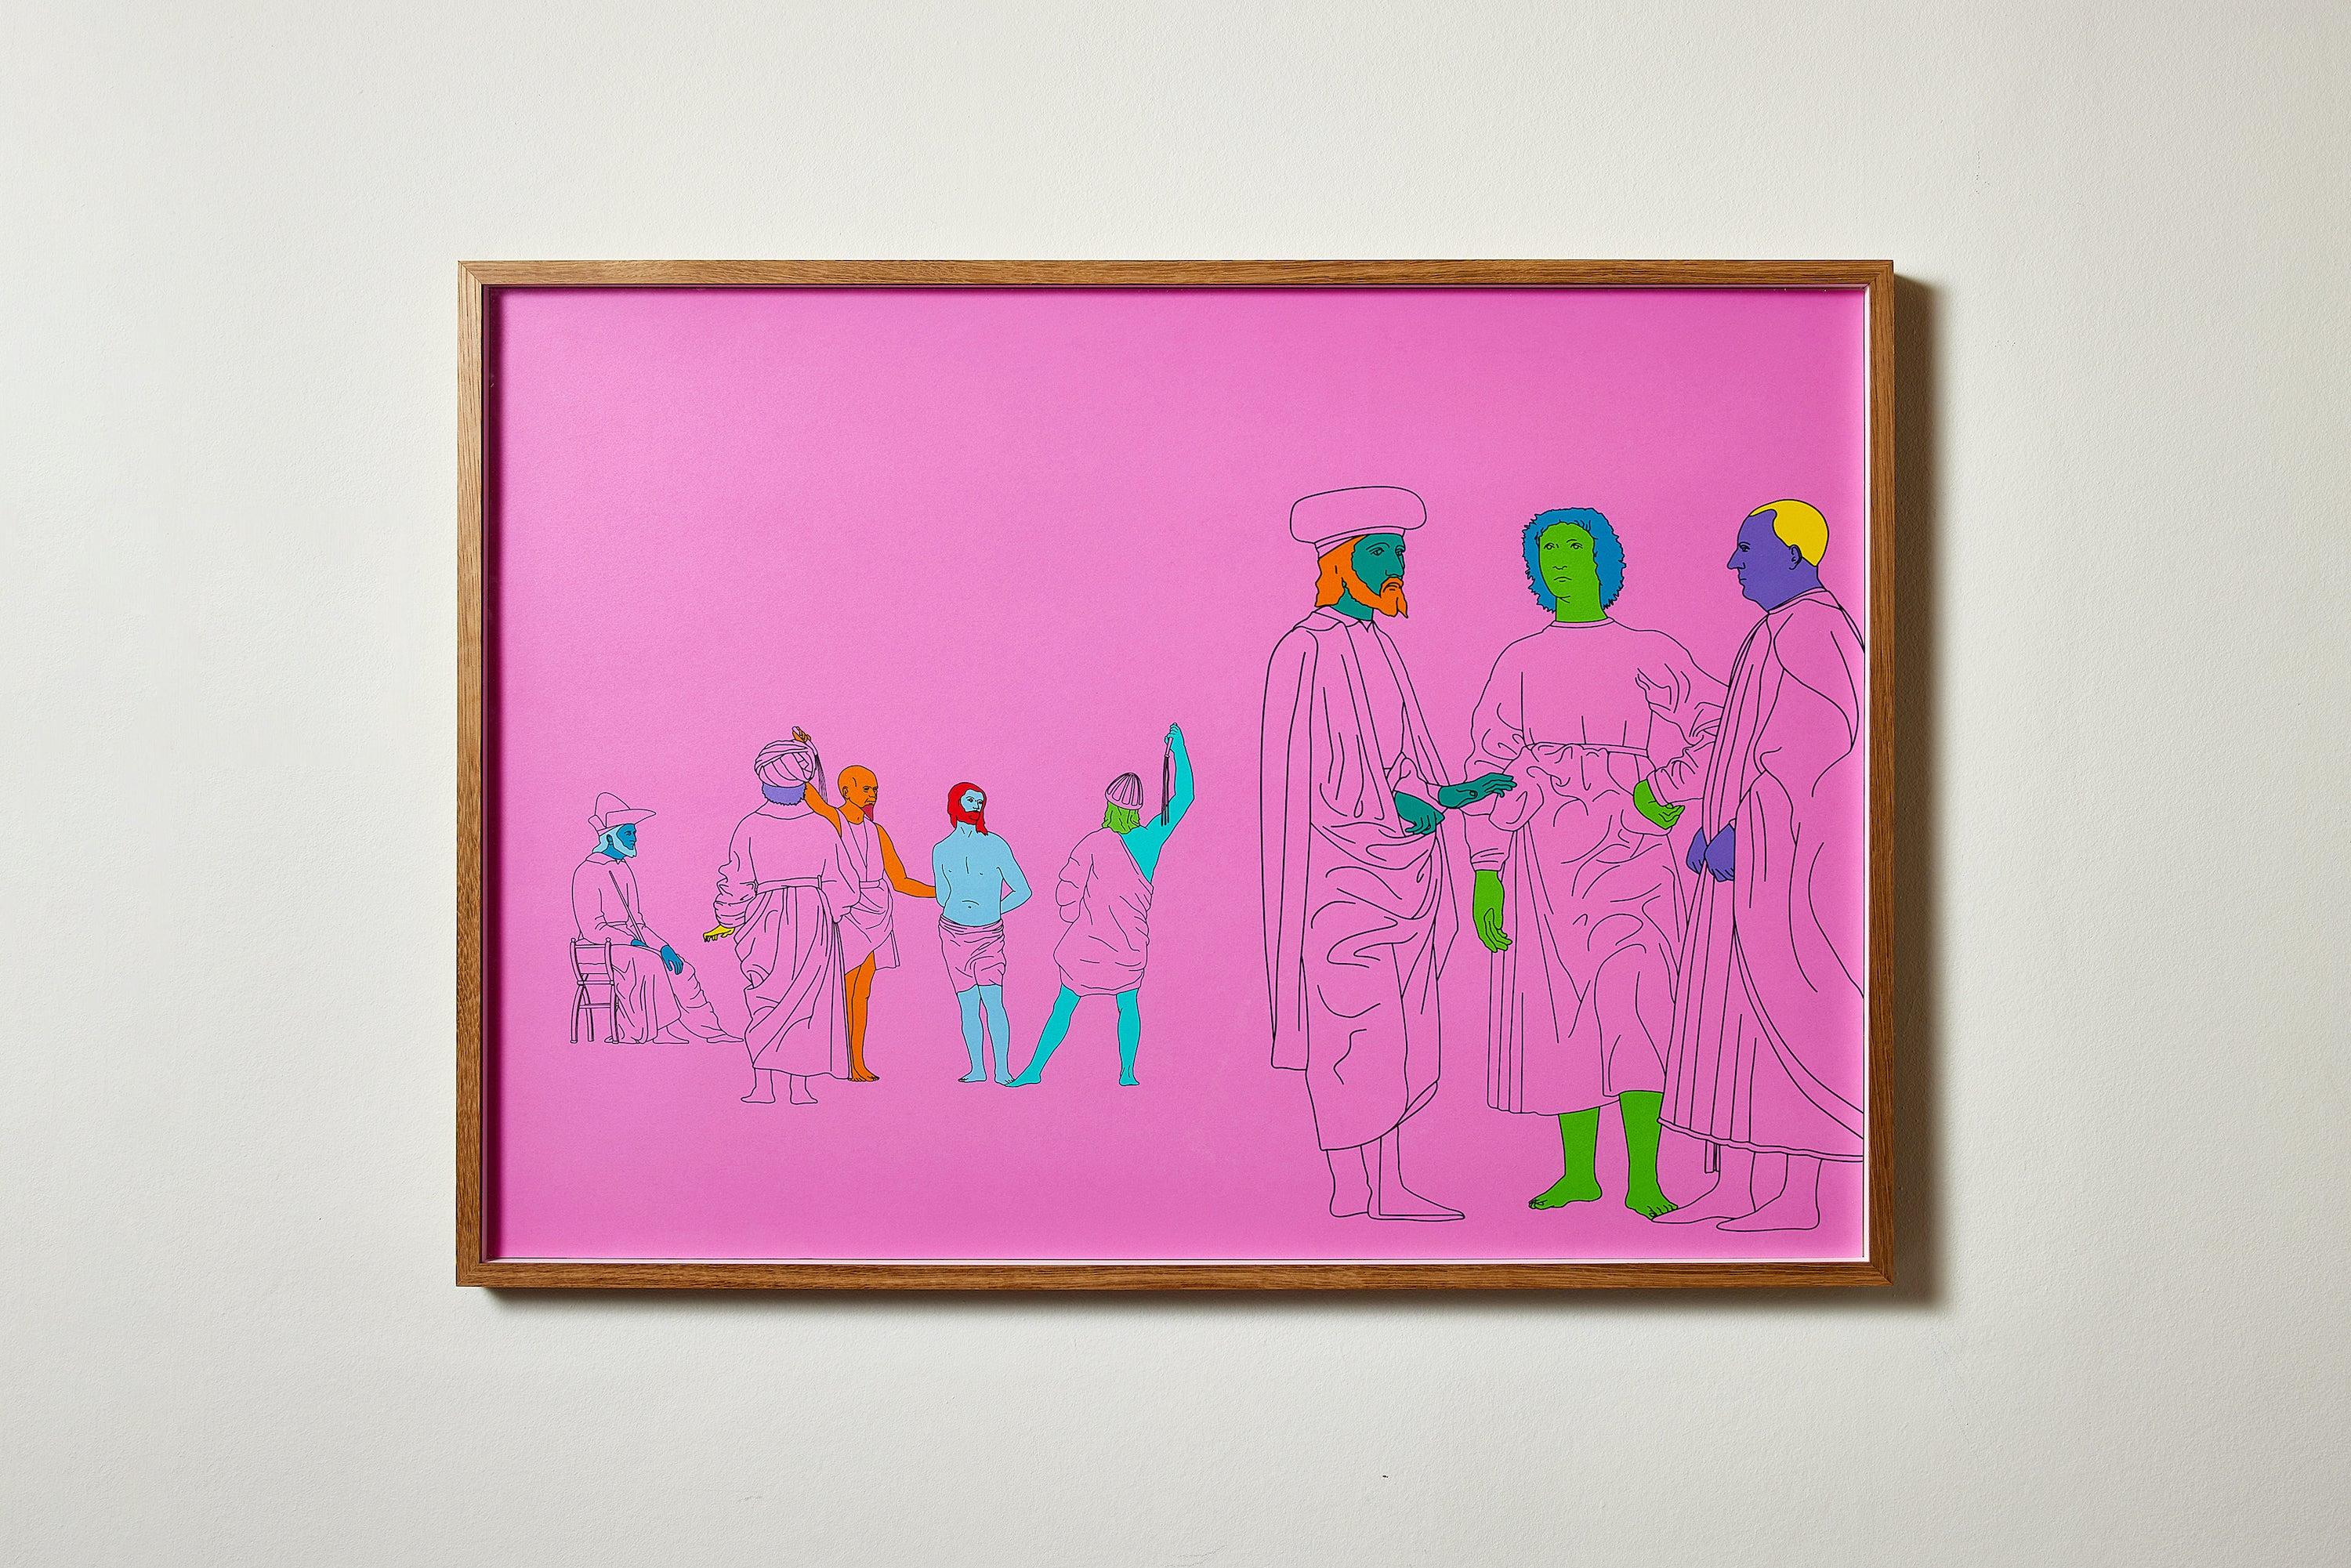 Deconstructing piero (pink), 2004
Michael Craig-Martin

A pair of screenprints in colours, on wove
Each signed, dated and numbered verso from the edition of 40
Published by Alan Cristea Gallery, London
Each sheet: 63 × 88.5 cm (24.8 × 34.8 in)